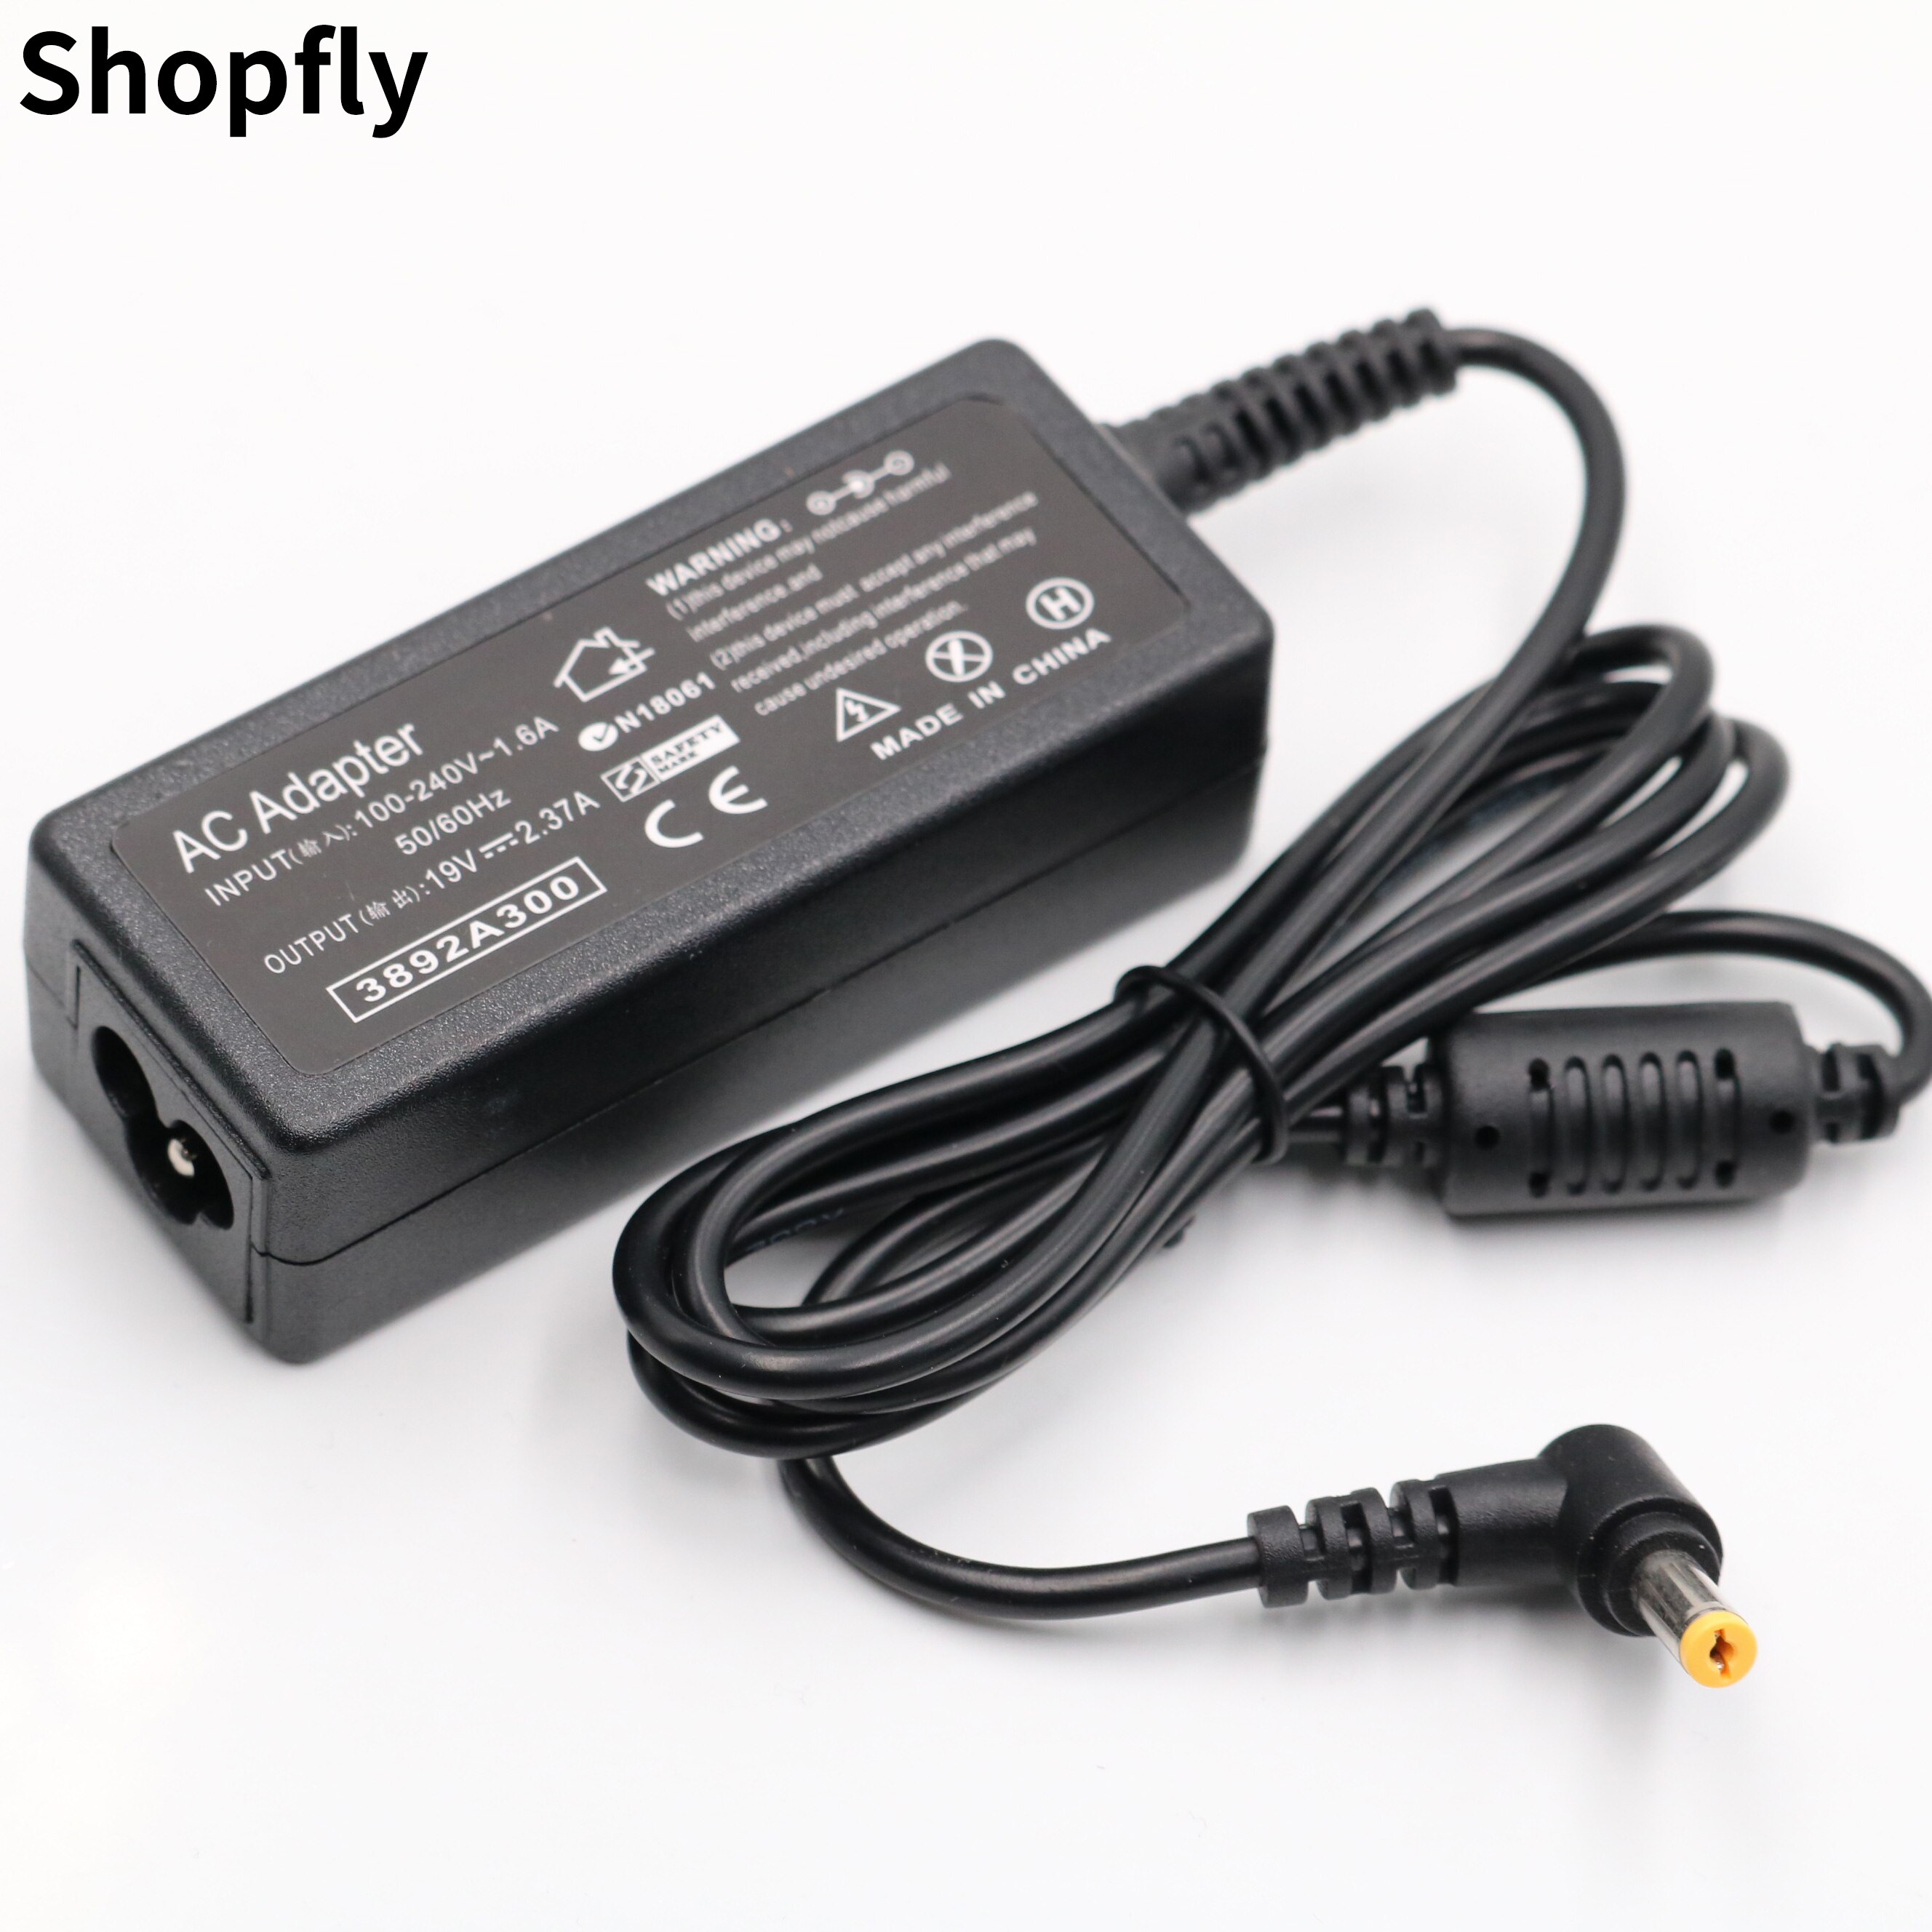 19V 2.37A Ac Power Adapter Laptop Charger Voor Acer Aspire ES1-512 ES1-522 ES1-523 ES1-524 ES1-531 ES1-533 ES1-571 ES1-572